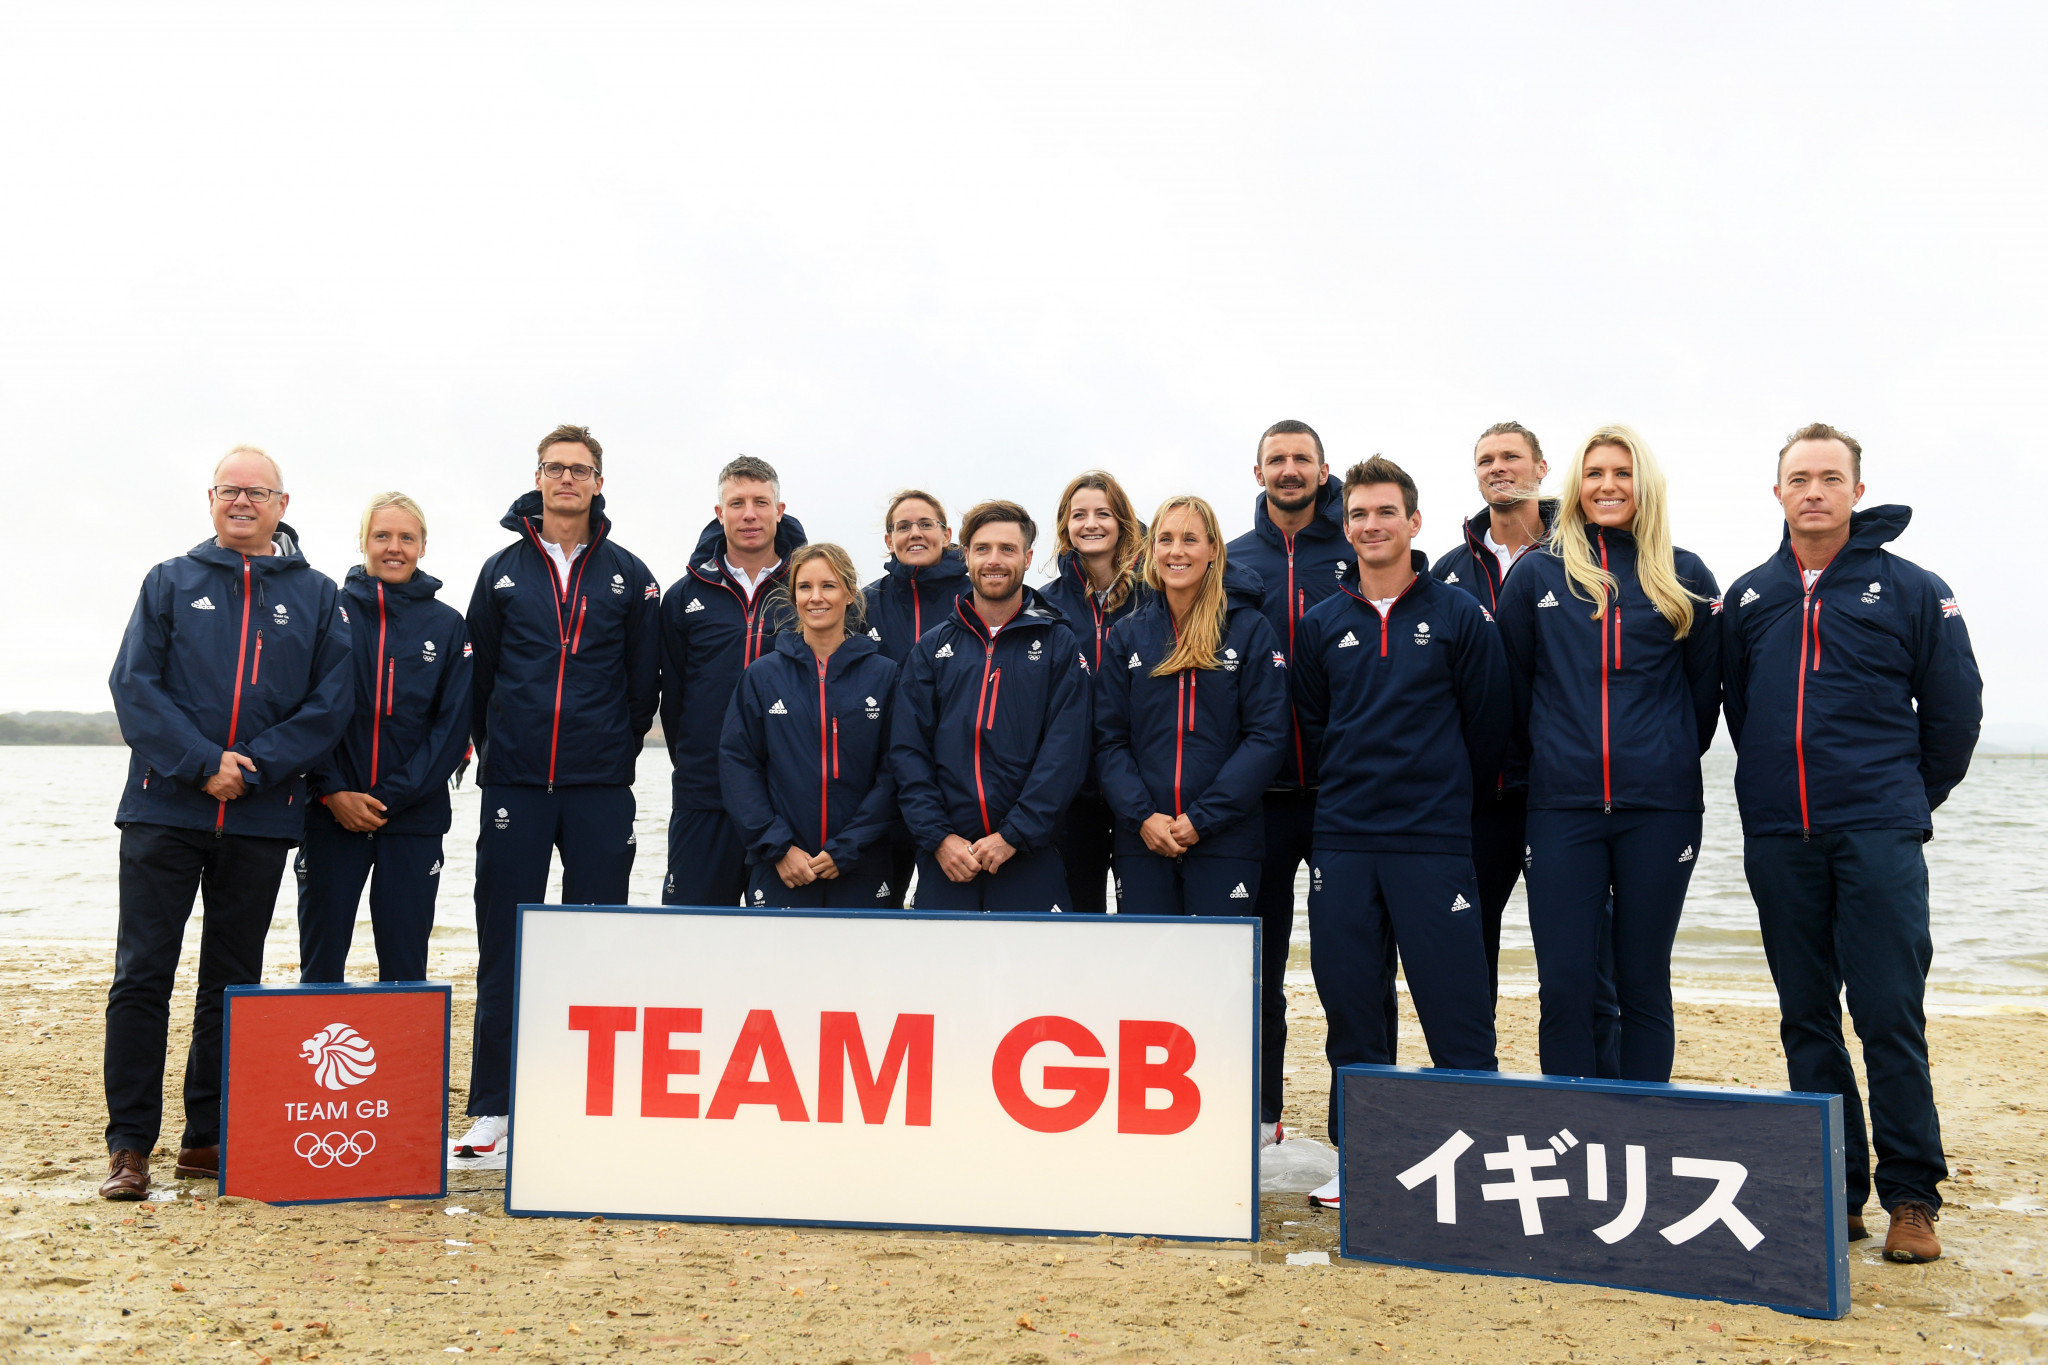 Team GB announced its first 12 sailors for the Tokyo 2020 Games back in October last year ©Getty Images